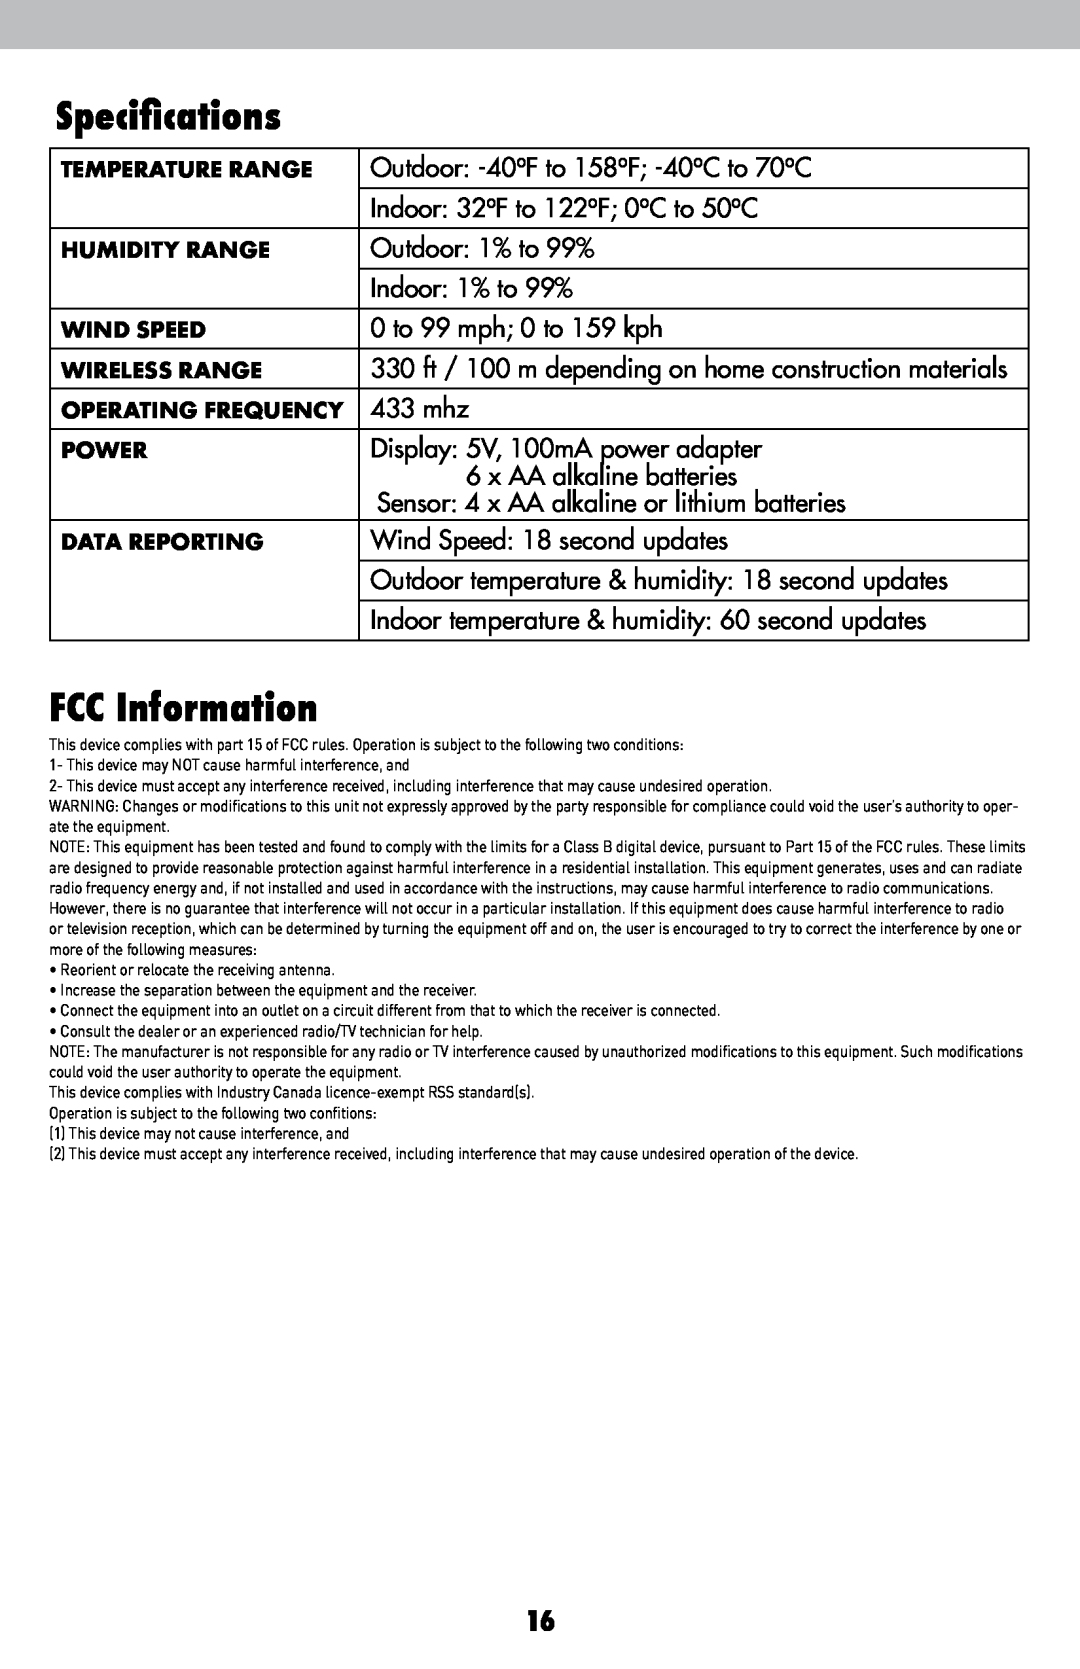 Acu-Rite 622 instruction manual Specifications, FCC Information 